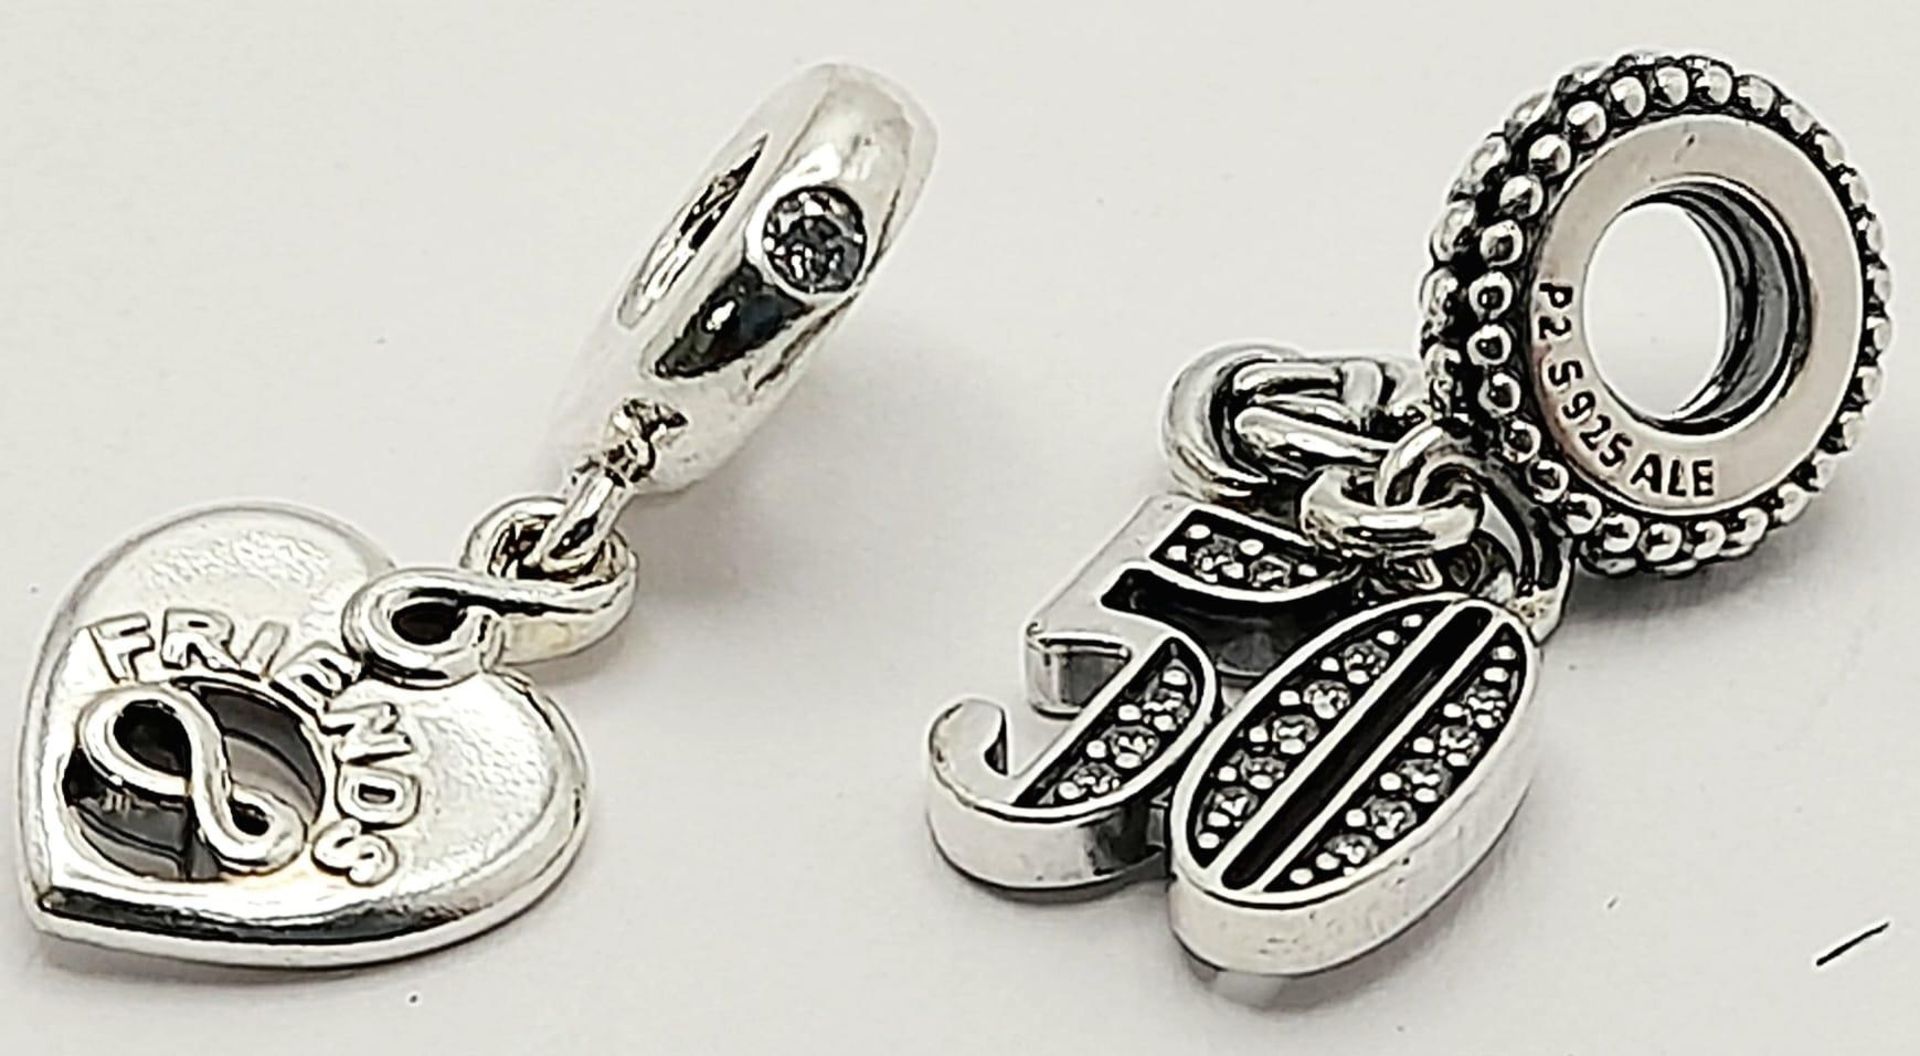 2X fancy Pandora 925 silver charms/pendants include a "Friend Forever" heart and a silver stone - Image 8 of 9